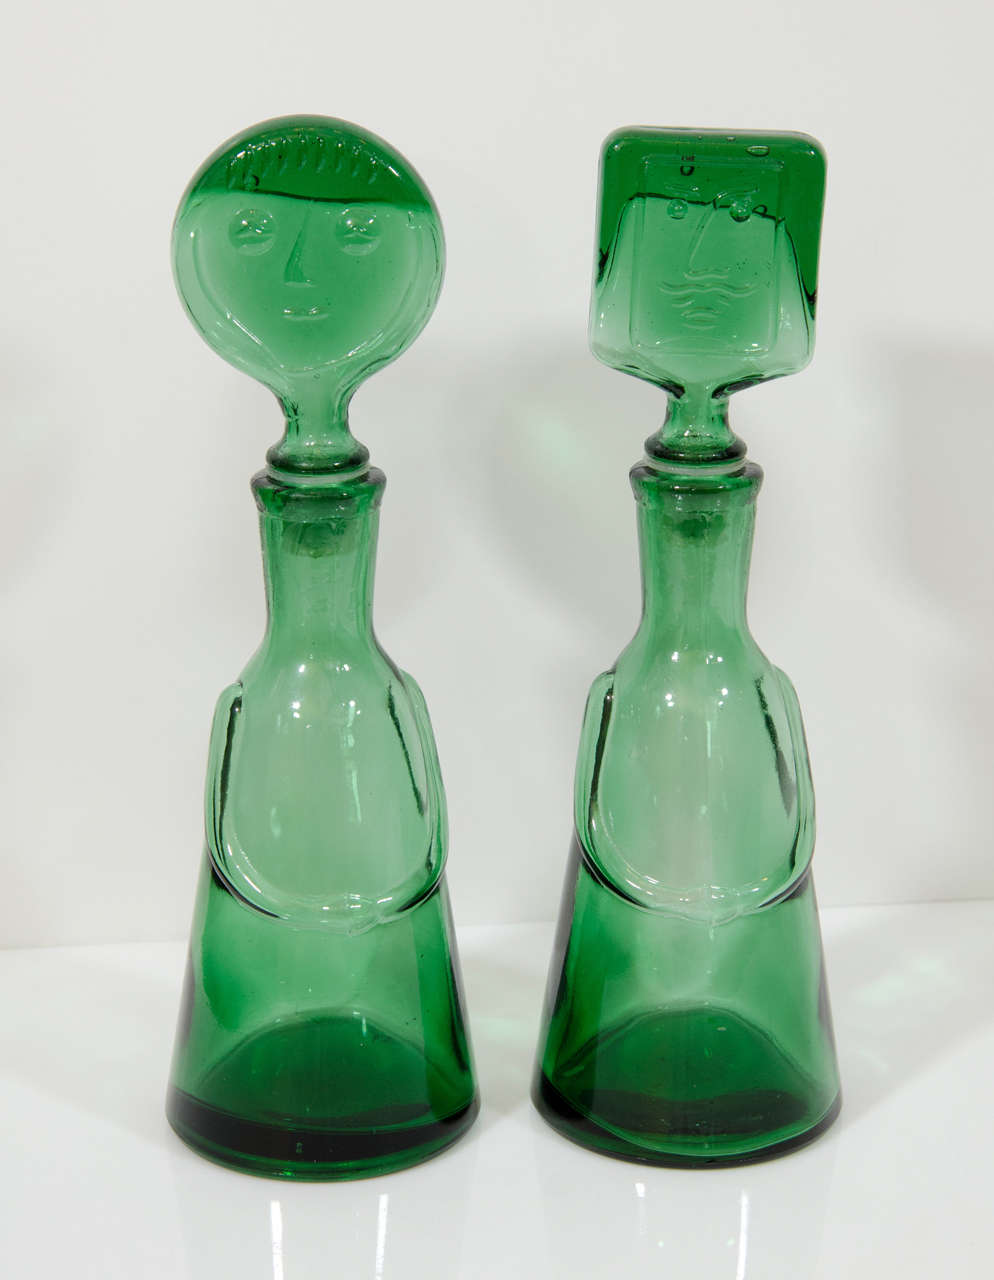 Charming pair of decanters from Erik Hoglund's "People" series. Please contact for location. Offered by Las Venus by Kenneth Clark, New York City.